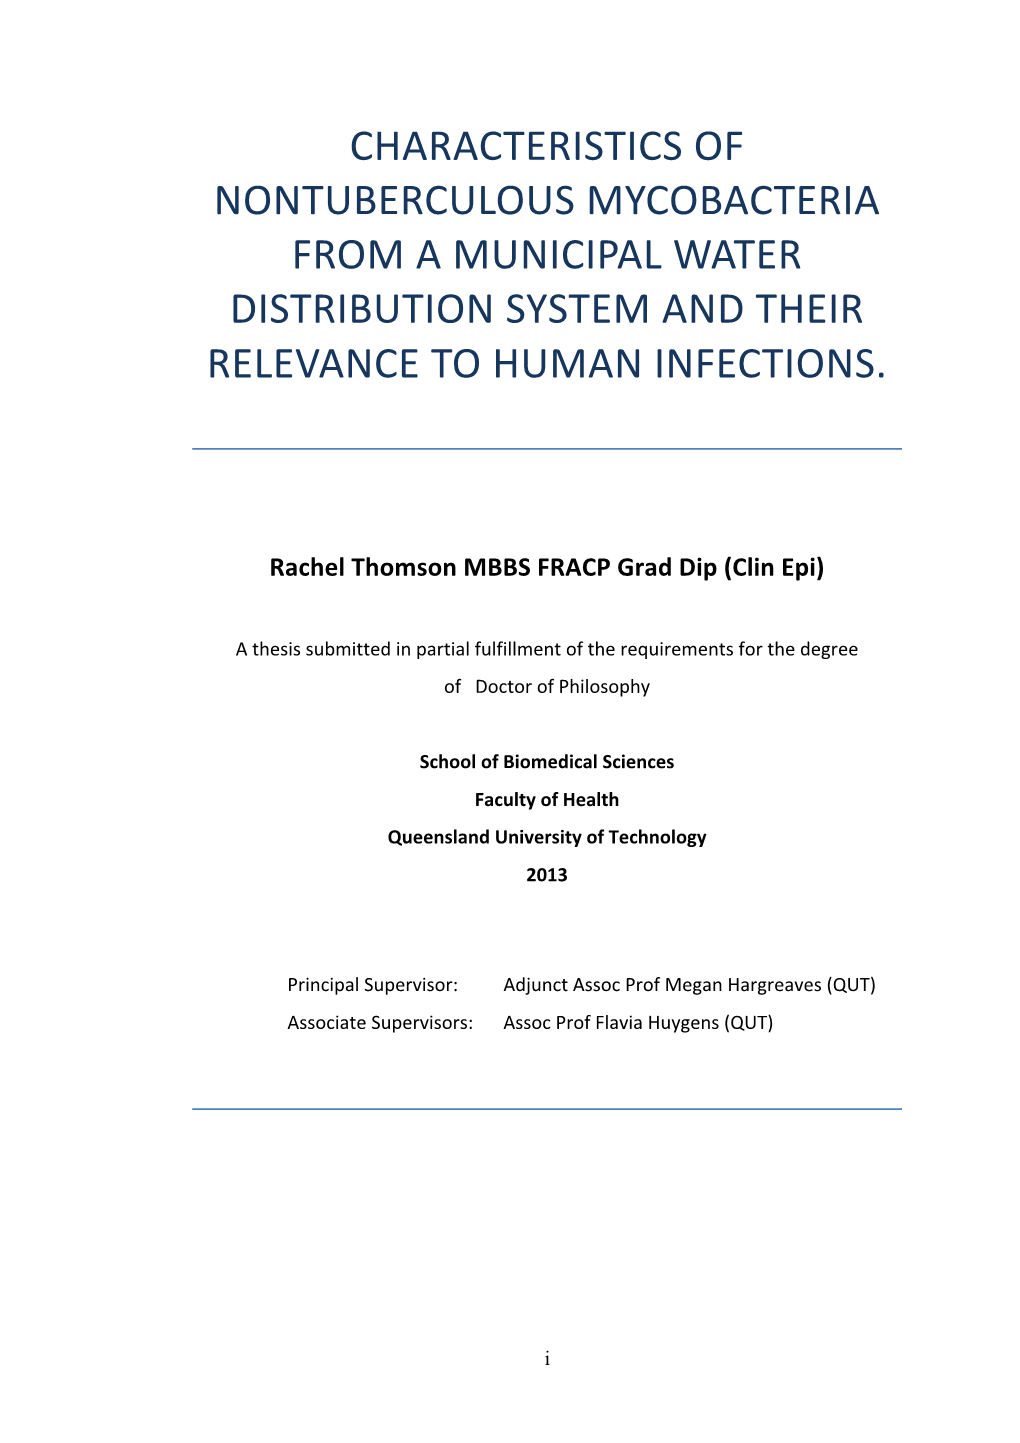 Characteristics of Nontuberculous Mycobacteria from a Municipal Water Distribution System and Their Relevance to Human Infections